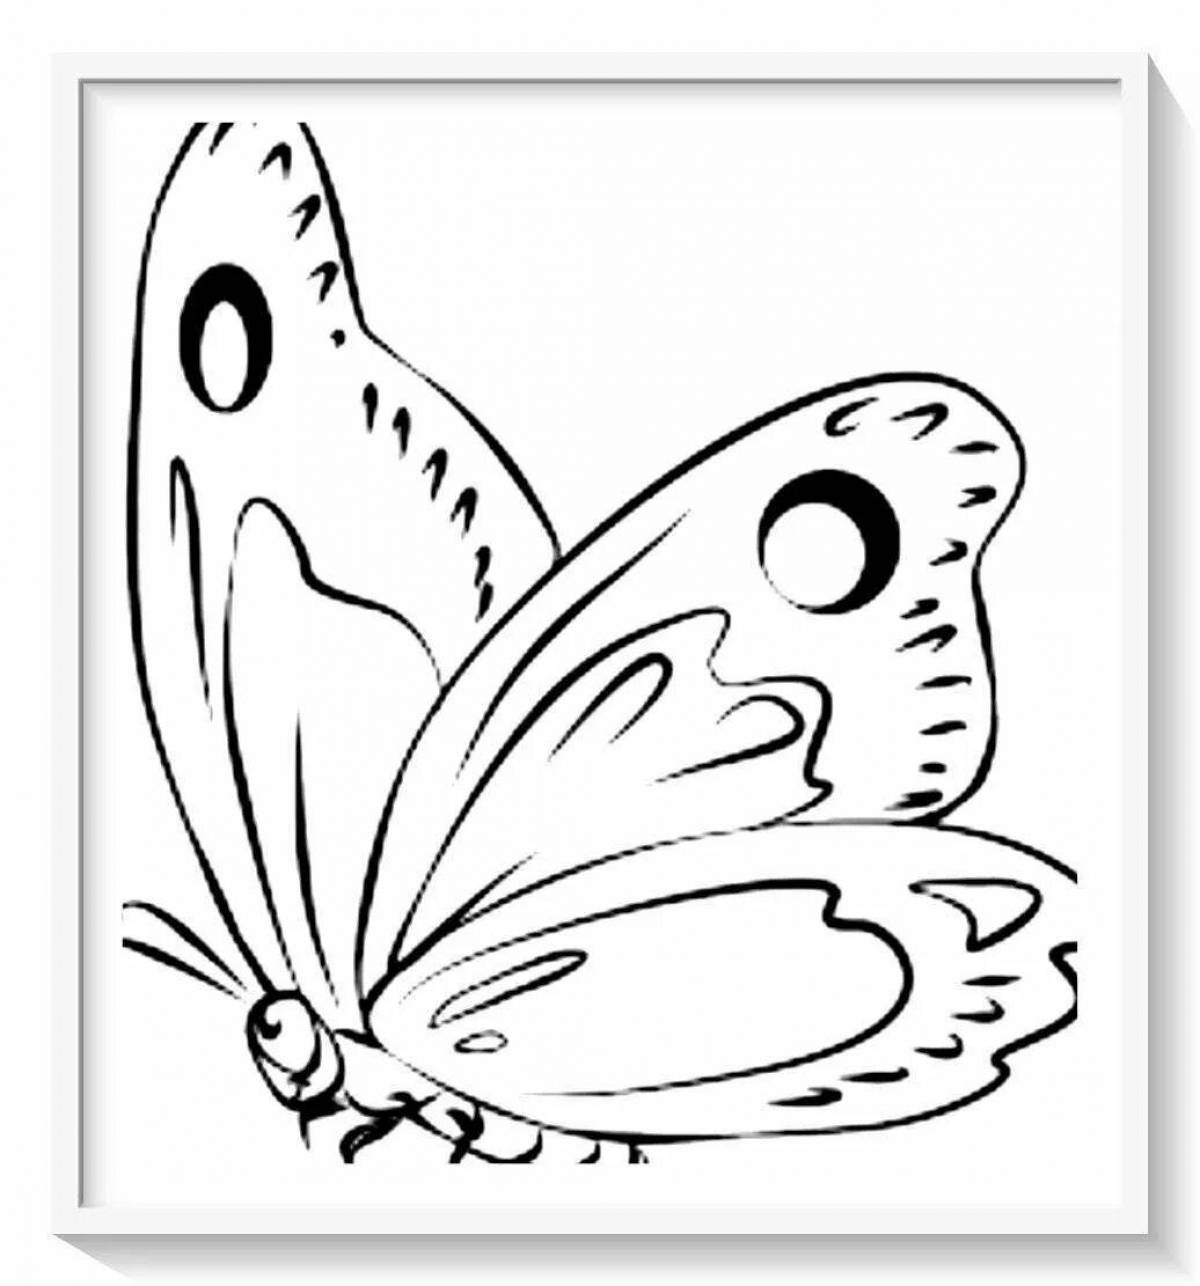 Coloring book shiny black and white butterflies